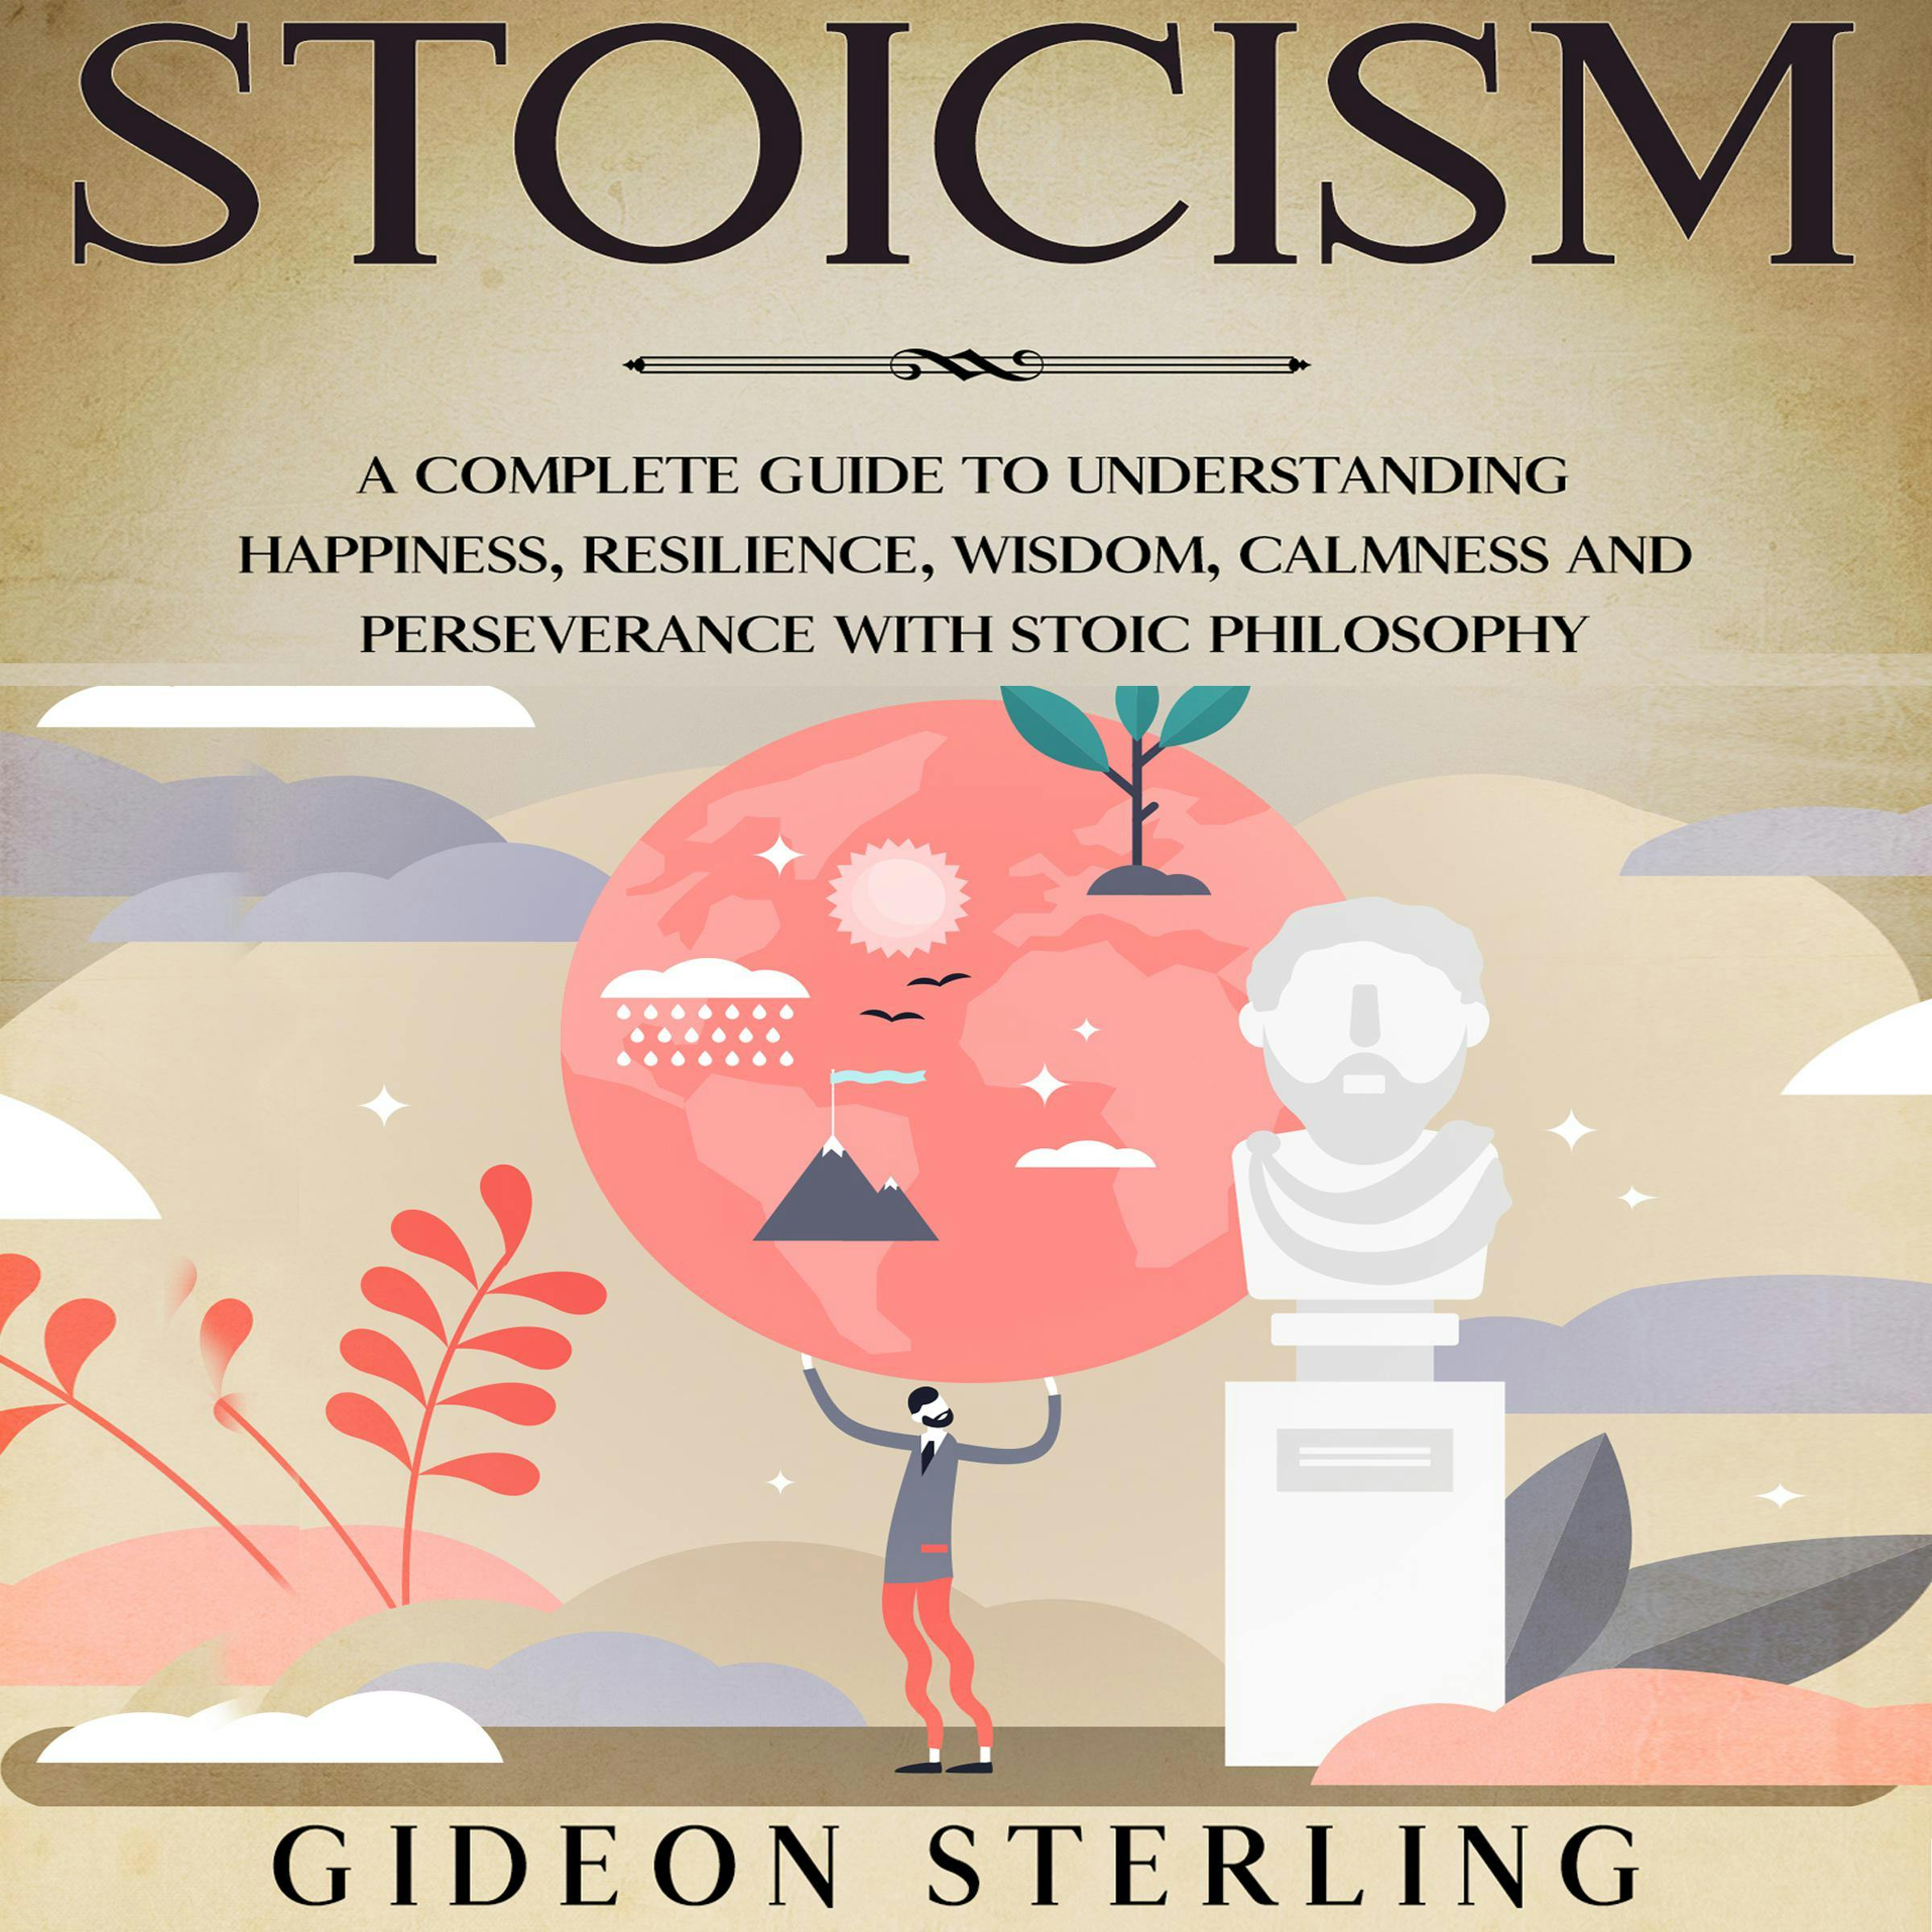 Stoicism: A Complete Guide to Understanding Happiness, Resilience, Wisdom, Calmness and Perseverance with Stoic Philosophy - undefined